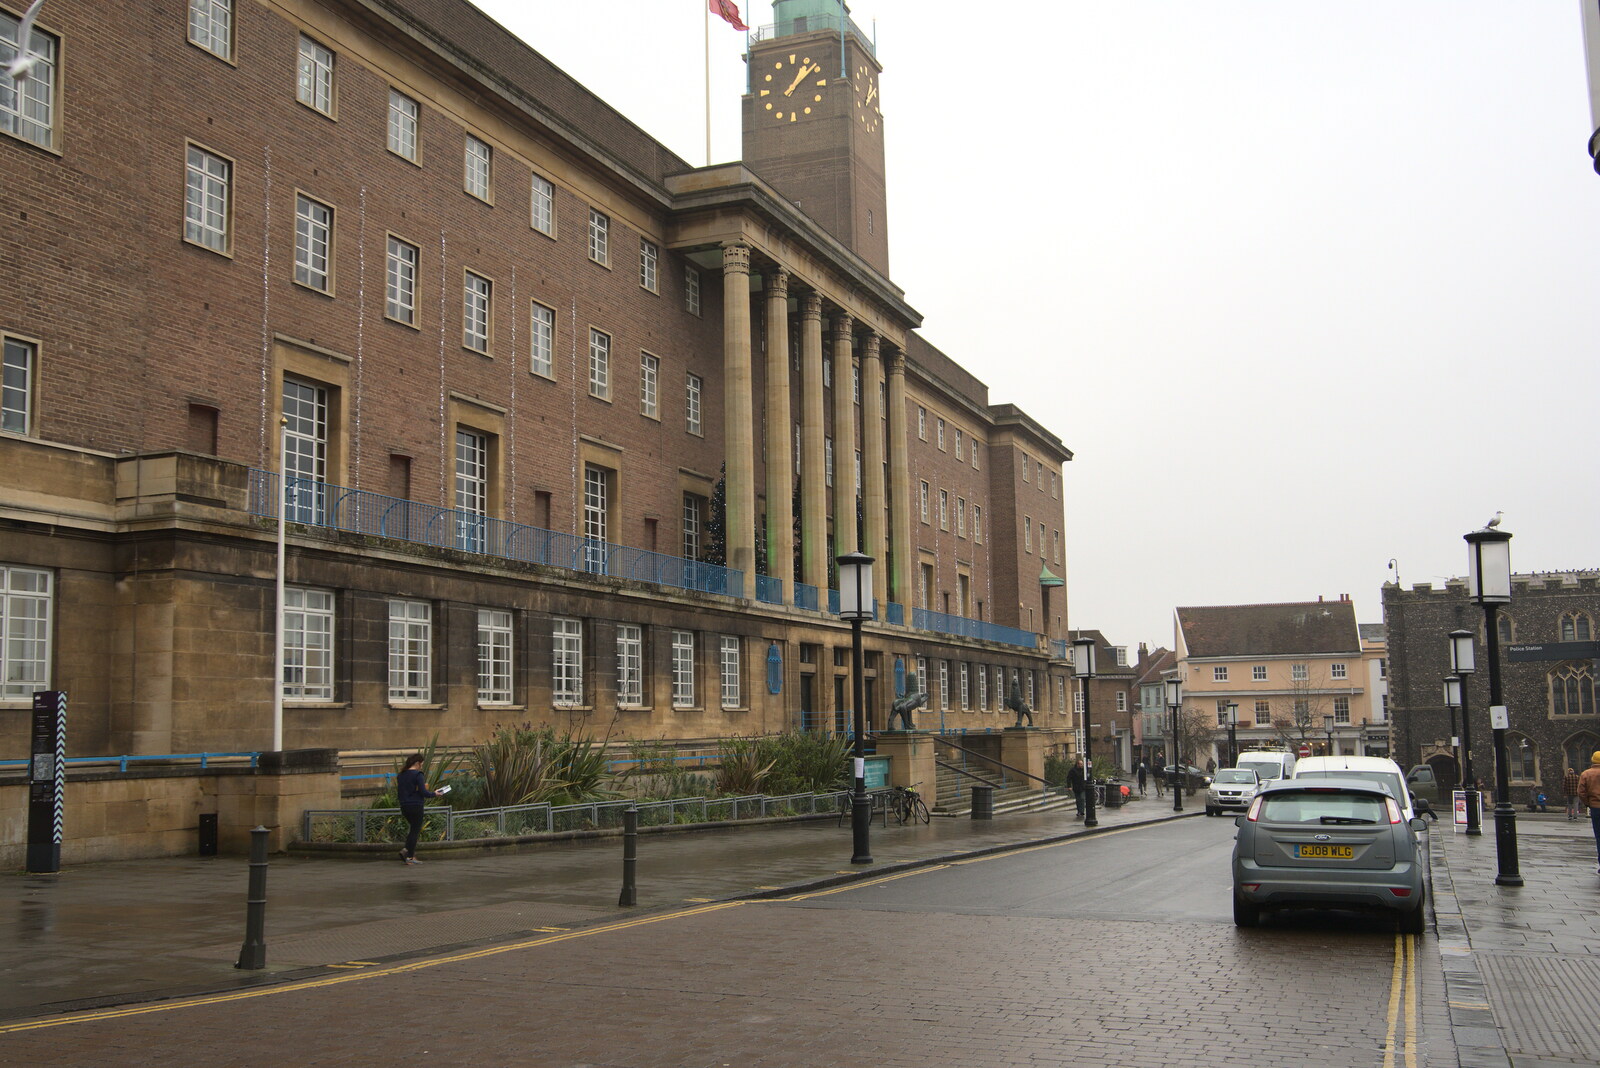 Norwich City Hall from Scooters and a Bit of Christmas Shopping, Eye and Norwich, Norfolk - 23rd December 2021